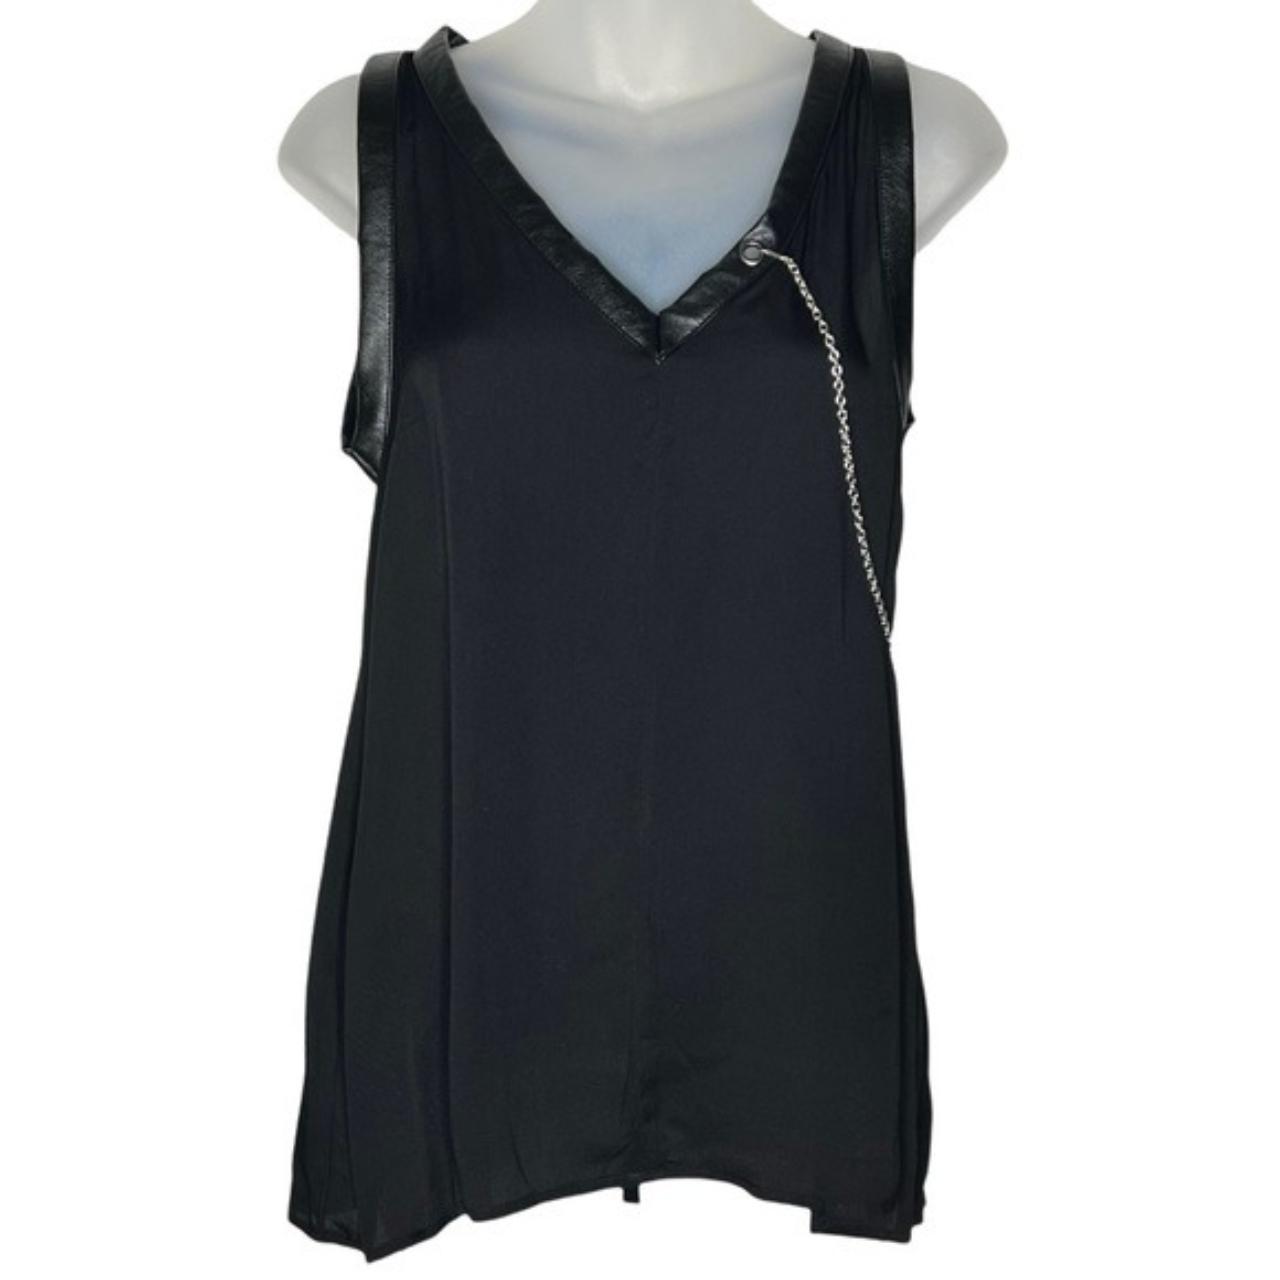 Product Image 1 - Disturbia 
Black top with chain